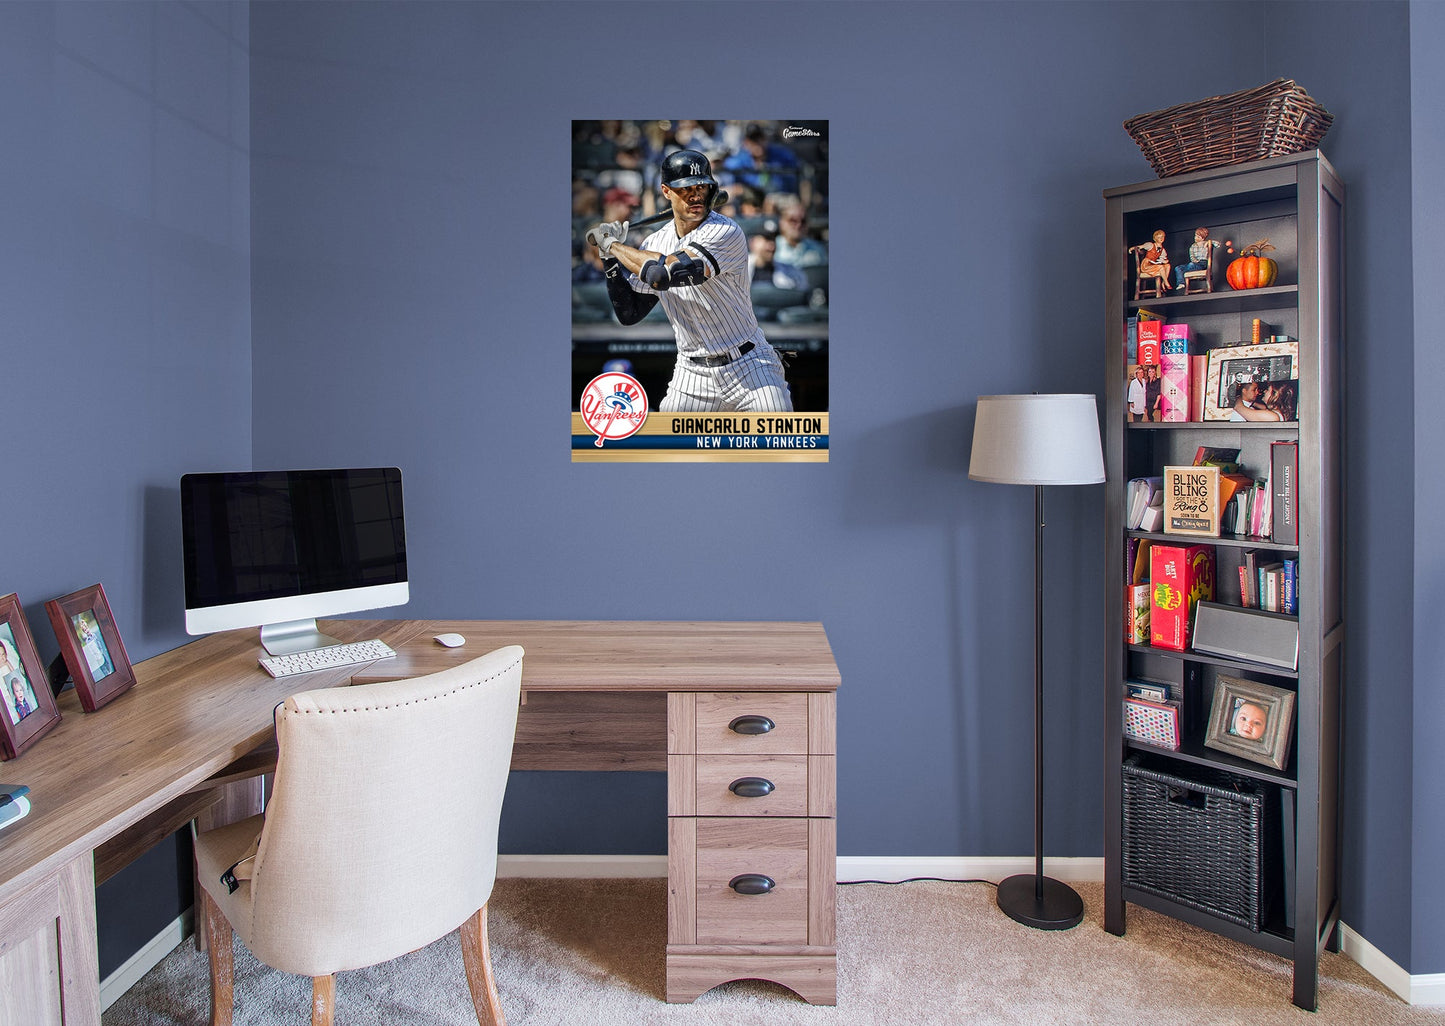 New York Yankees: Giancarlo Stanton  GameStar        - Officially Licensed MLB Removable Wall   Adhesive Decal